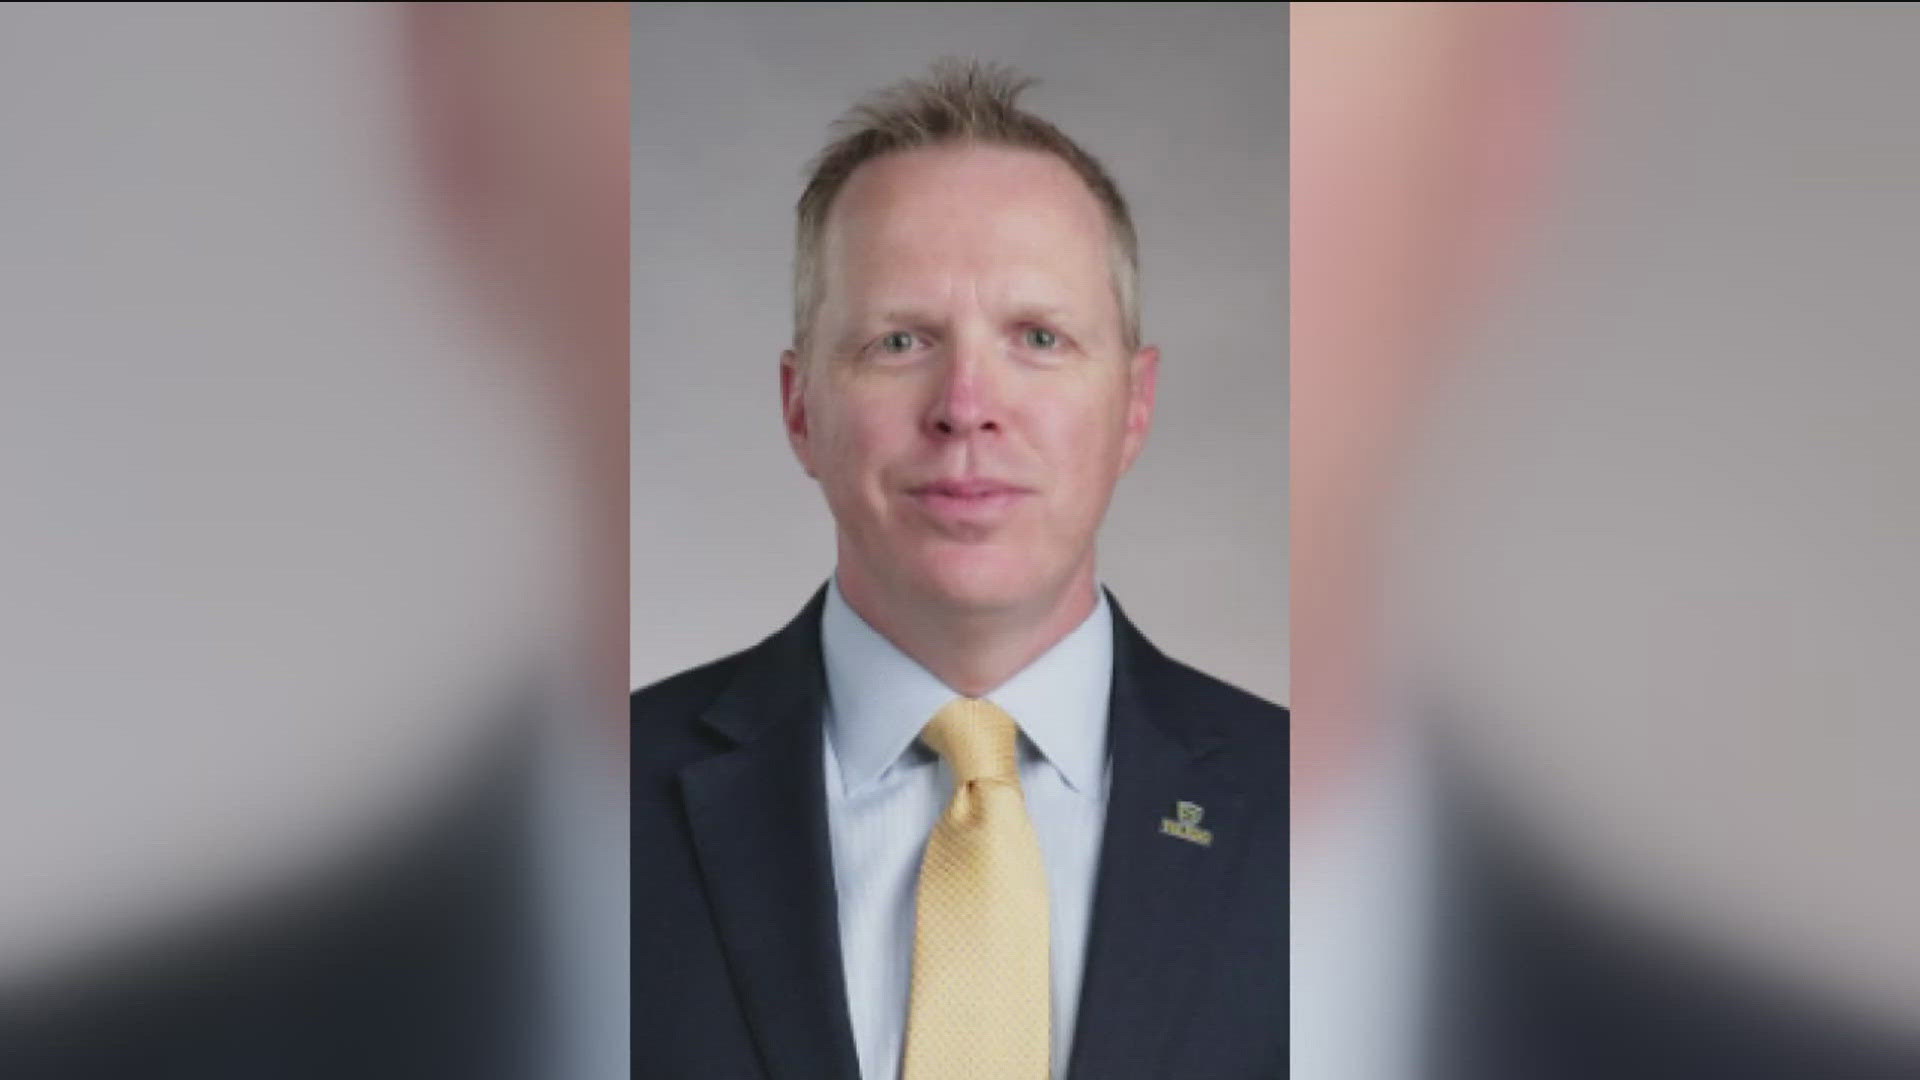 Matt Schroeder, who has served as executive vice president at UToledo since 2019, will be the interim president following the departure of Gregory Postel.